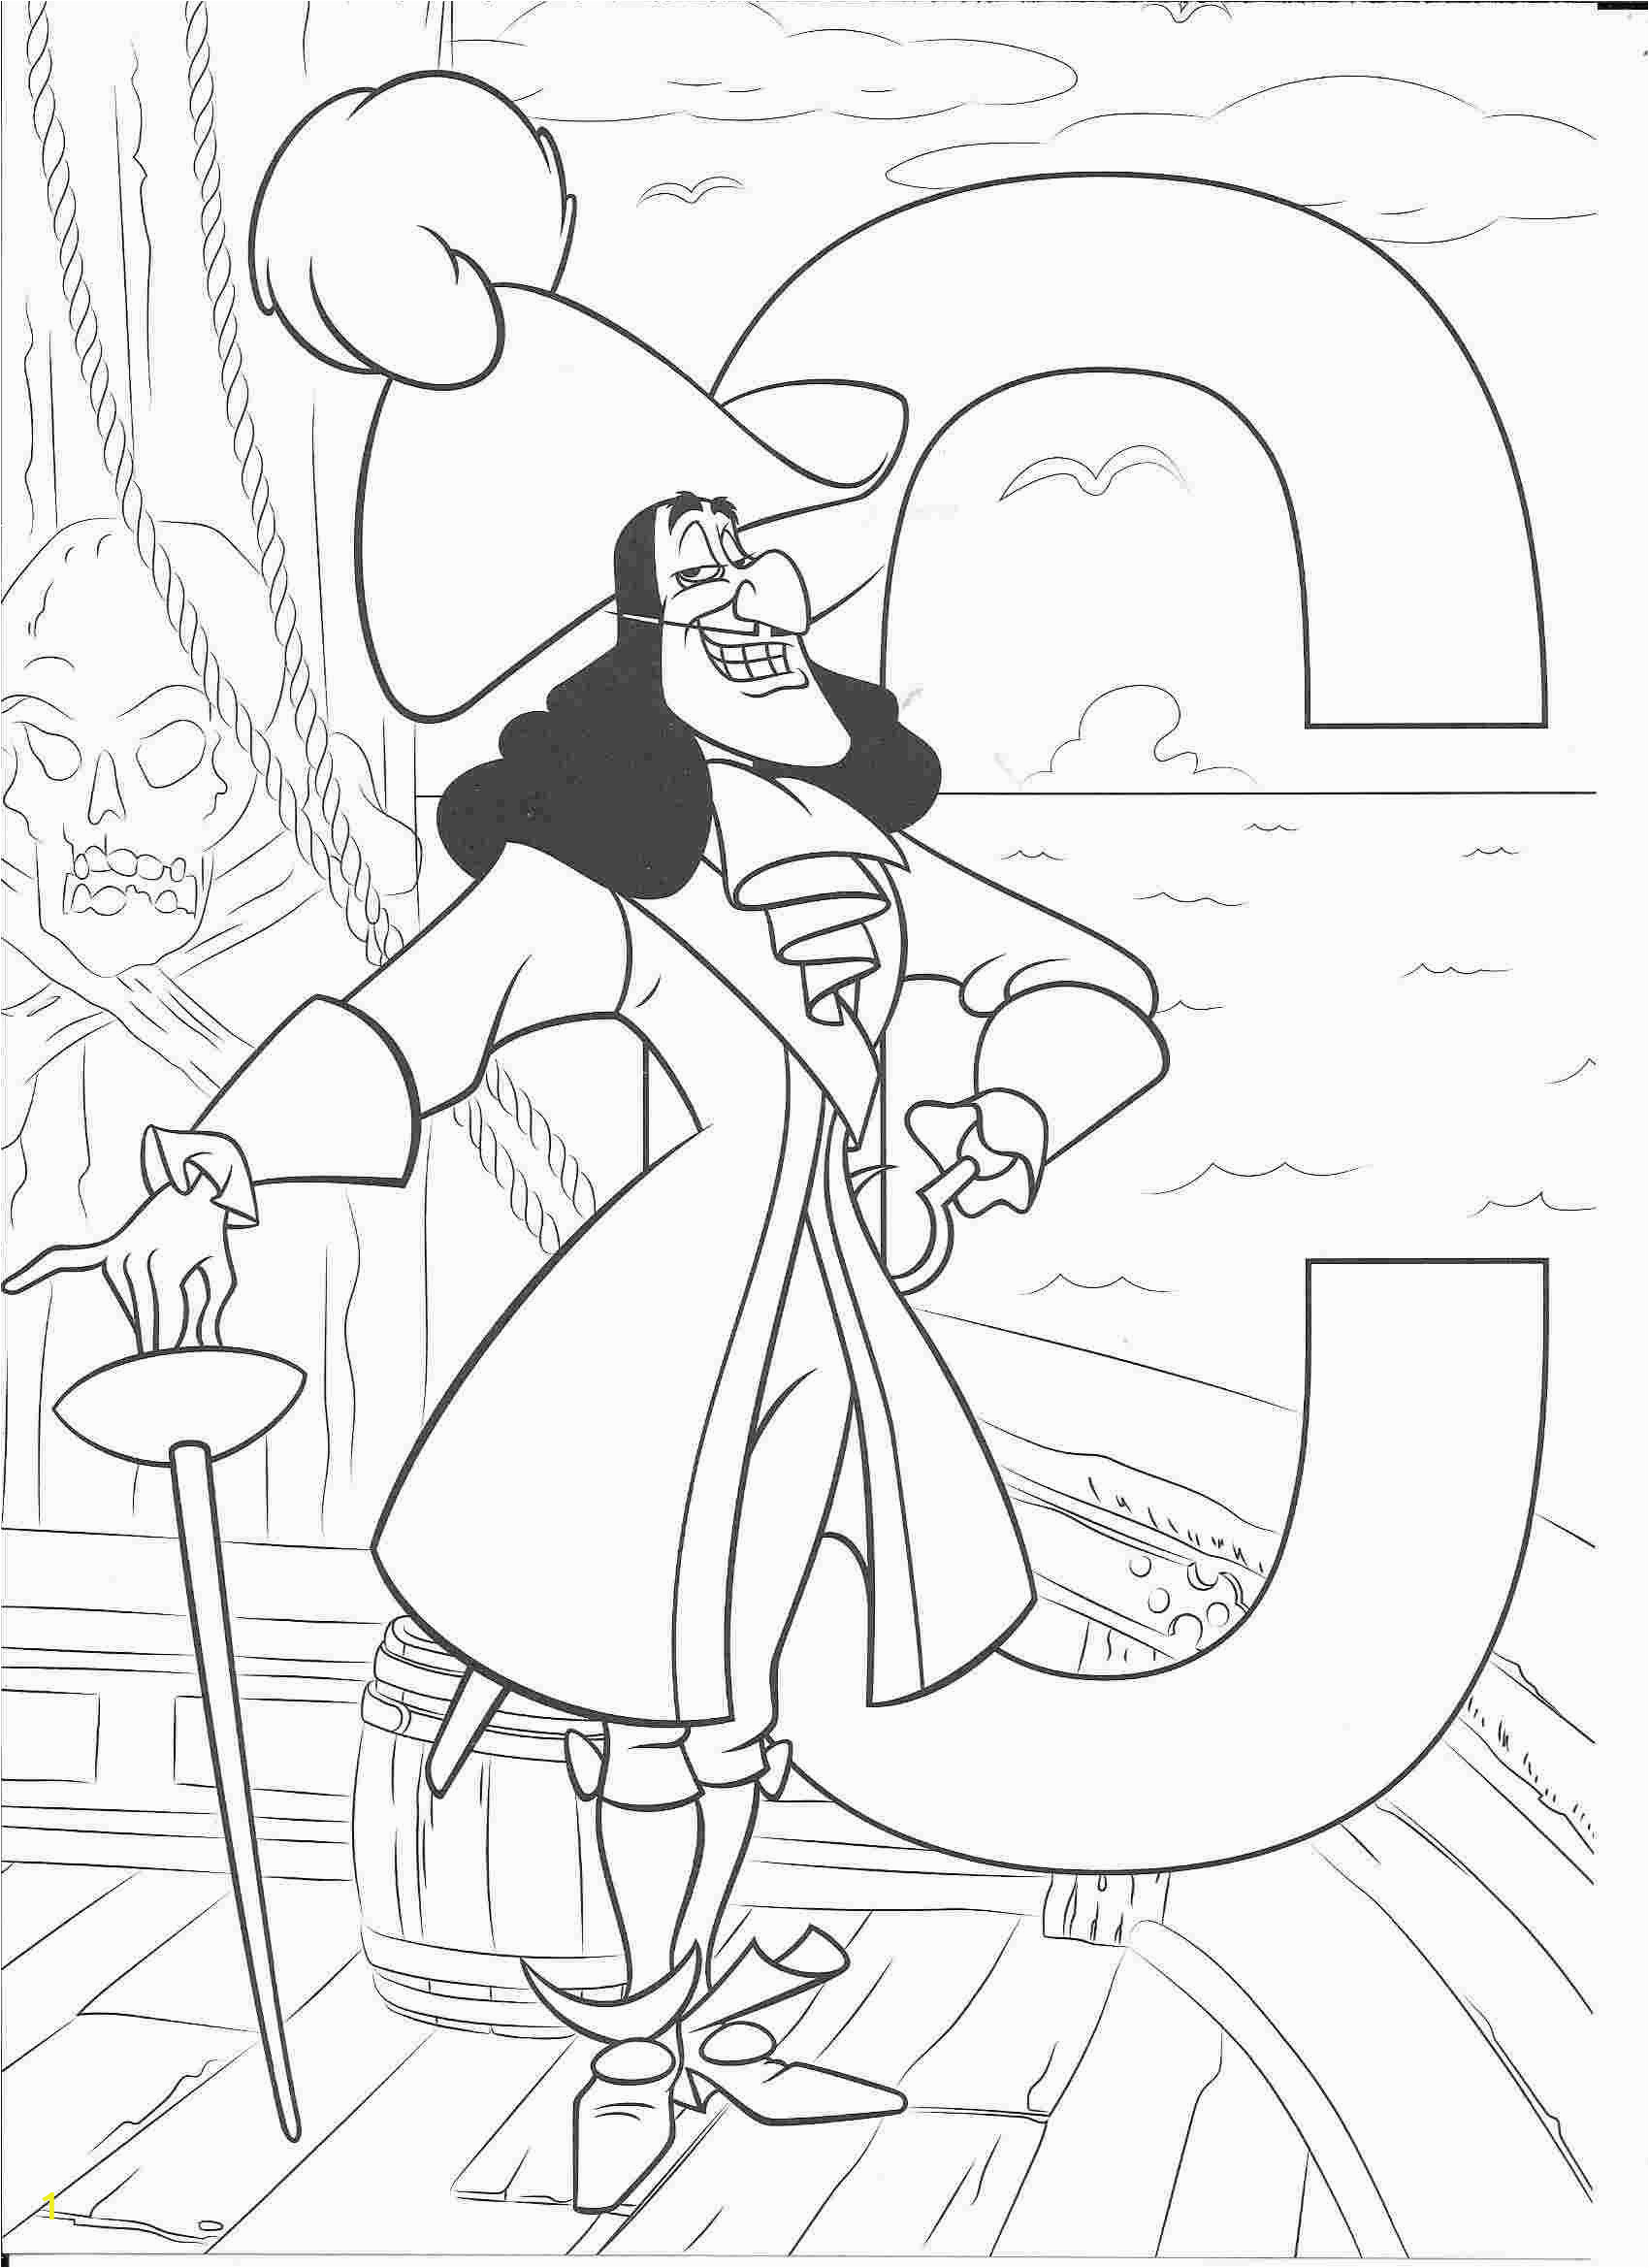 Disney Coloring Pages that You Can Print 5 Number Coloring Sheets Activities Worksheets Schools